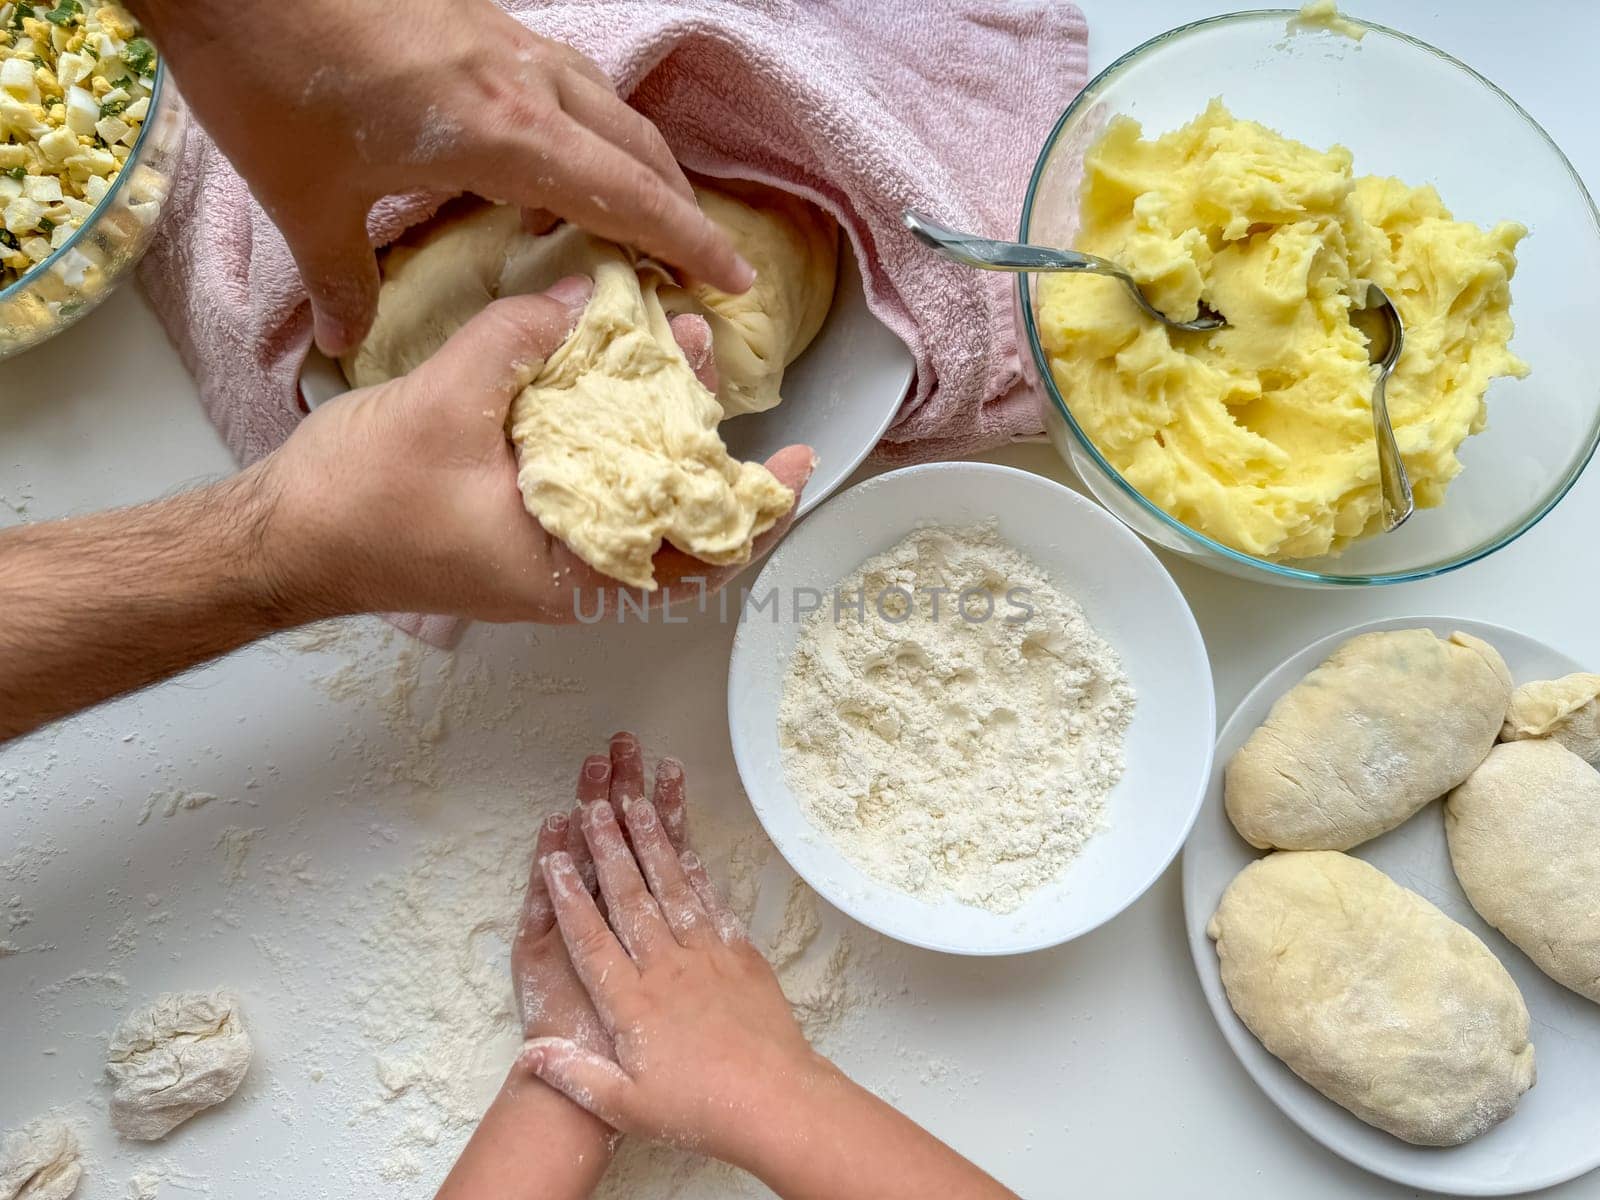 The hands of child and father knead the dough for making pies on white table, top view. High quality